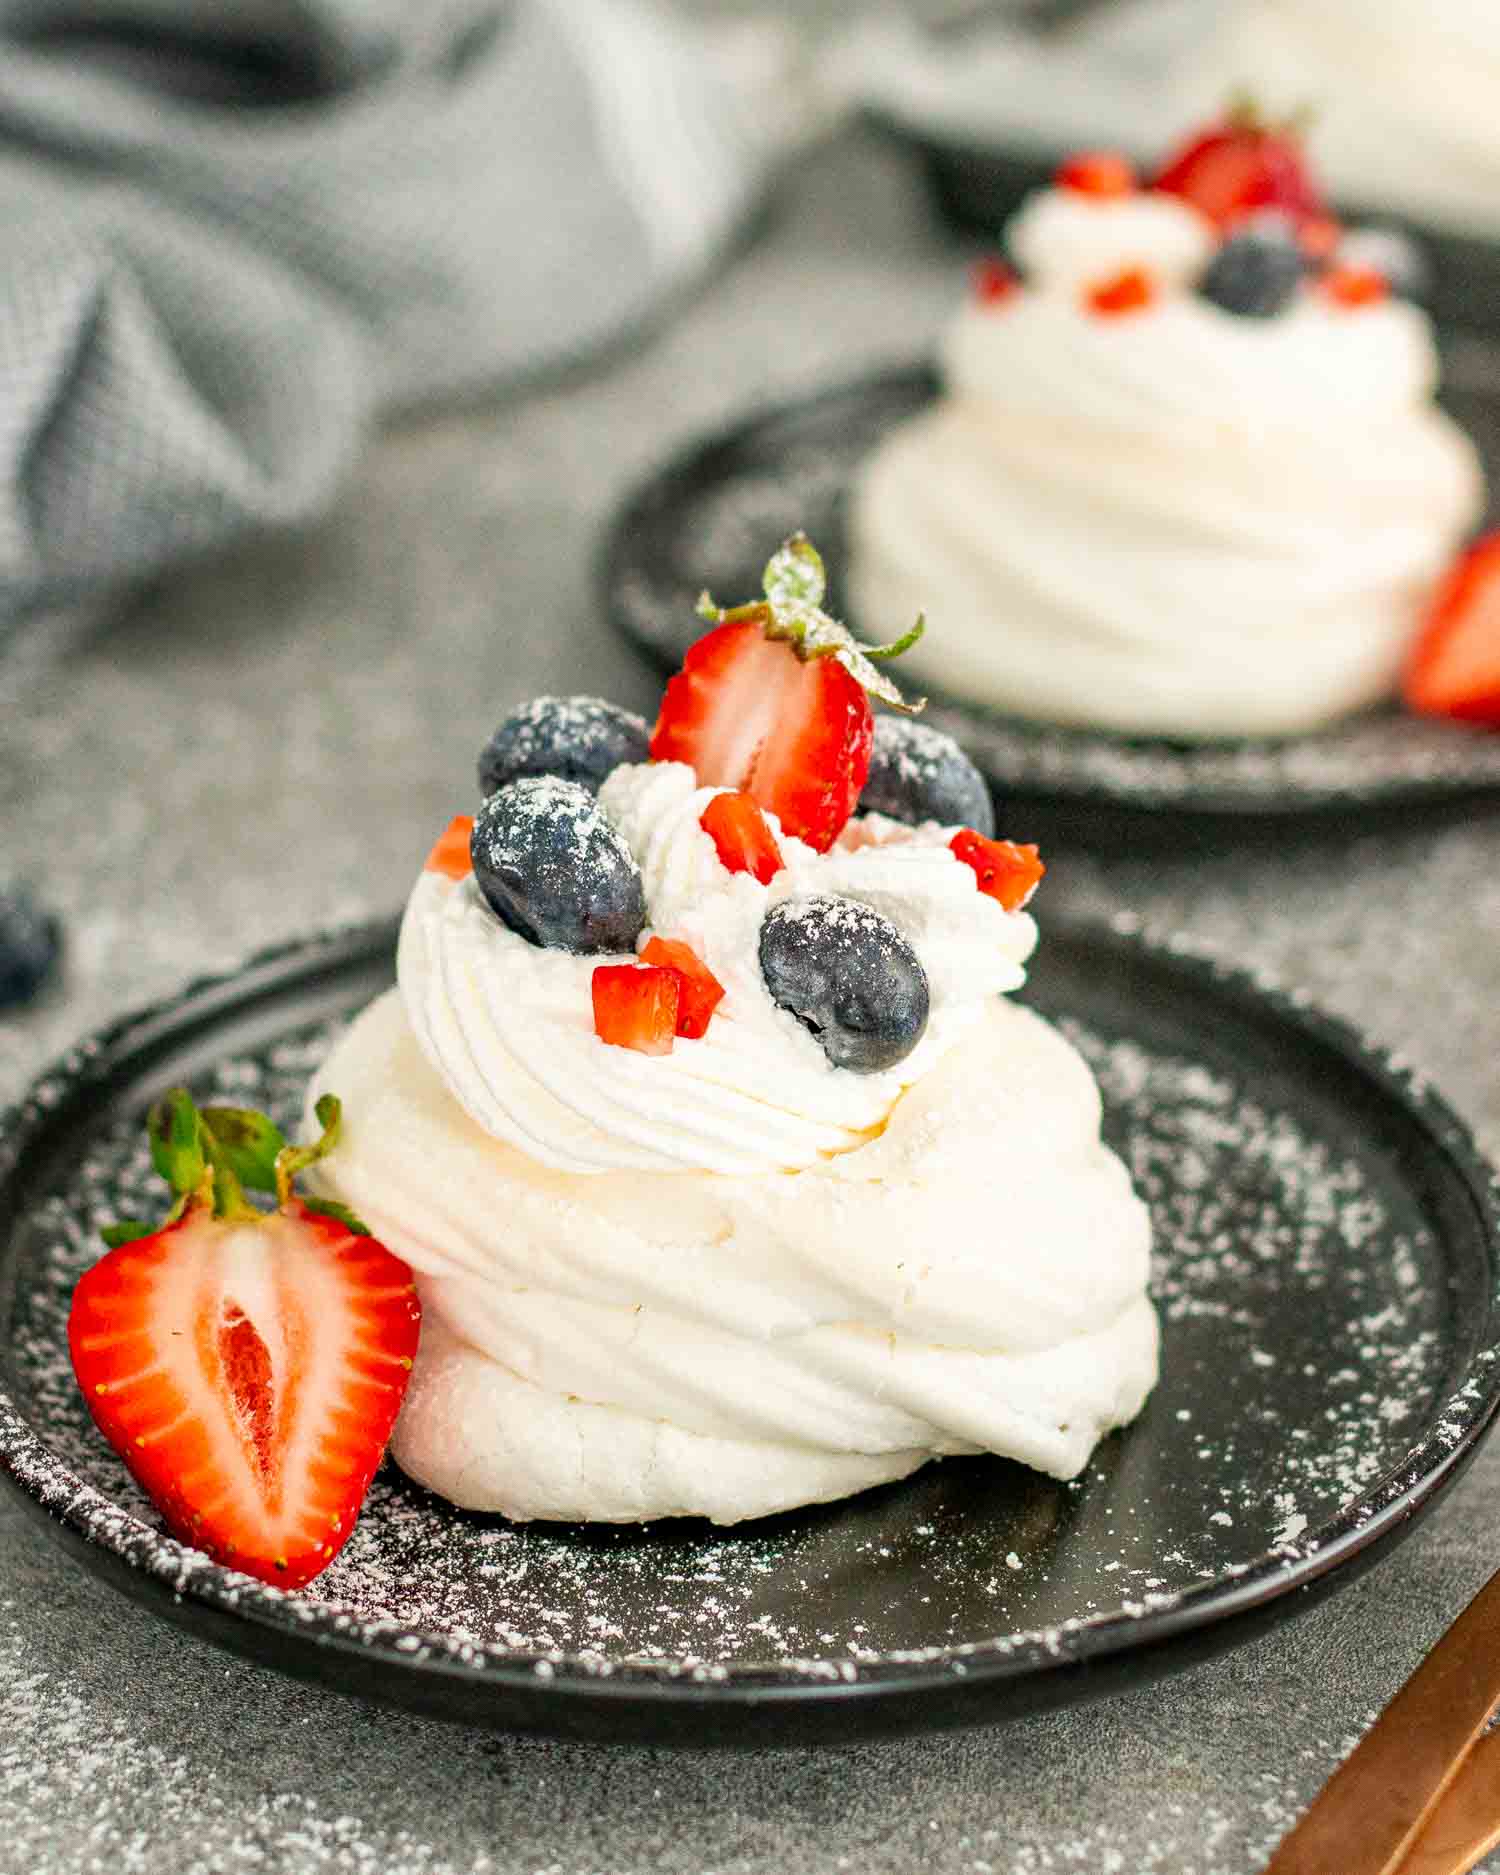 mini pavlova on a metal plate topped with whipped cream and berries.